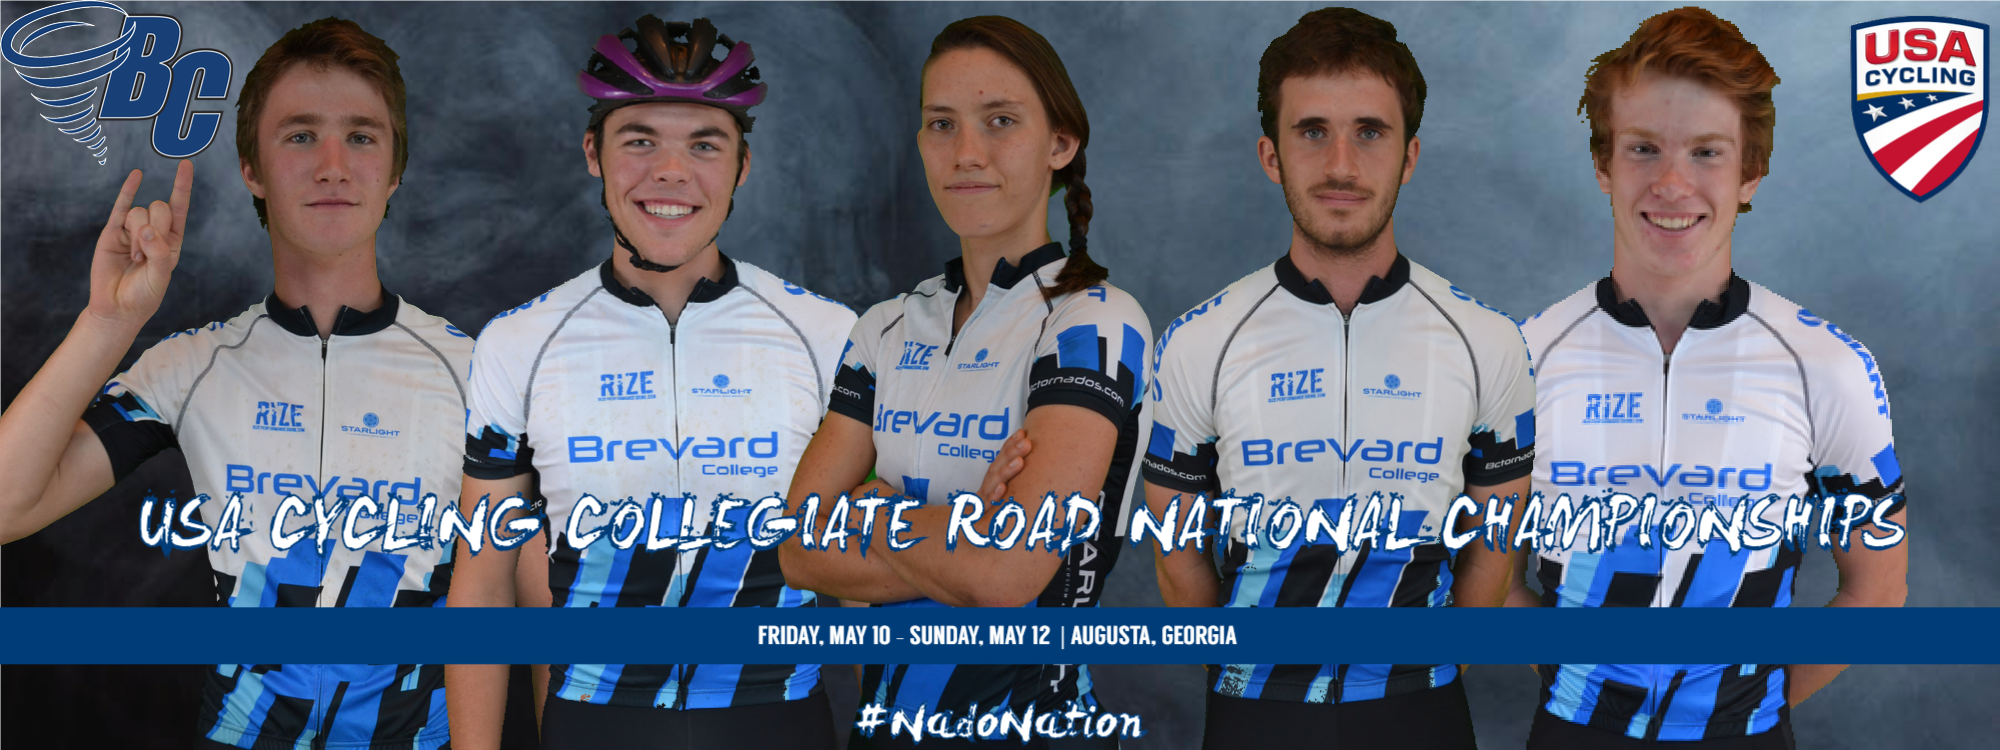 Brevard College Cycling to Compete at USA Cycling Road National Championships